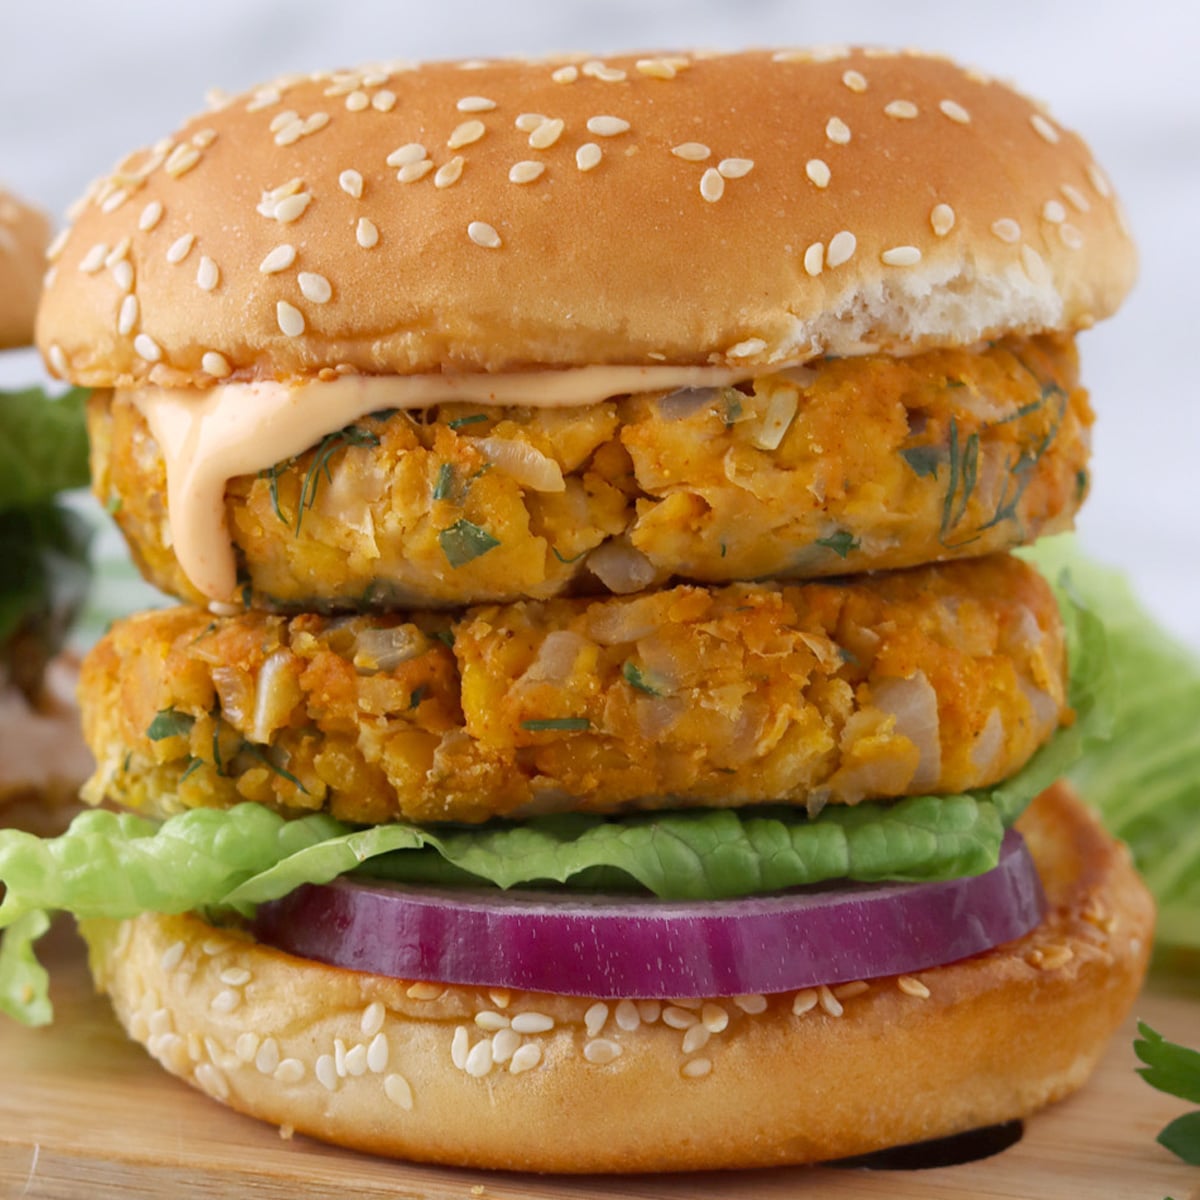 Close up of an assembled chickpea burger with two patties, a fluffy bun, sriracha mayo, red onion and lettuce.